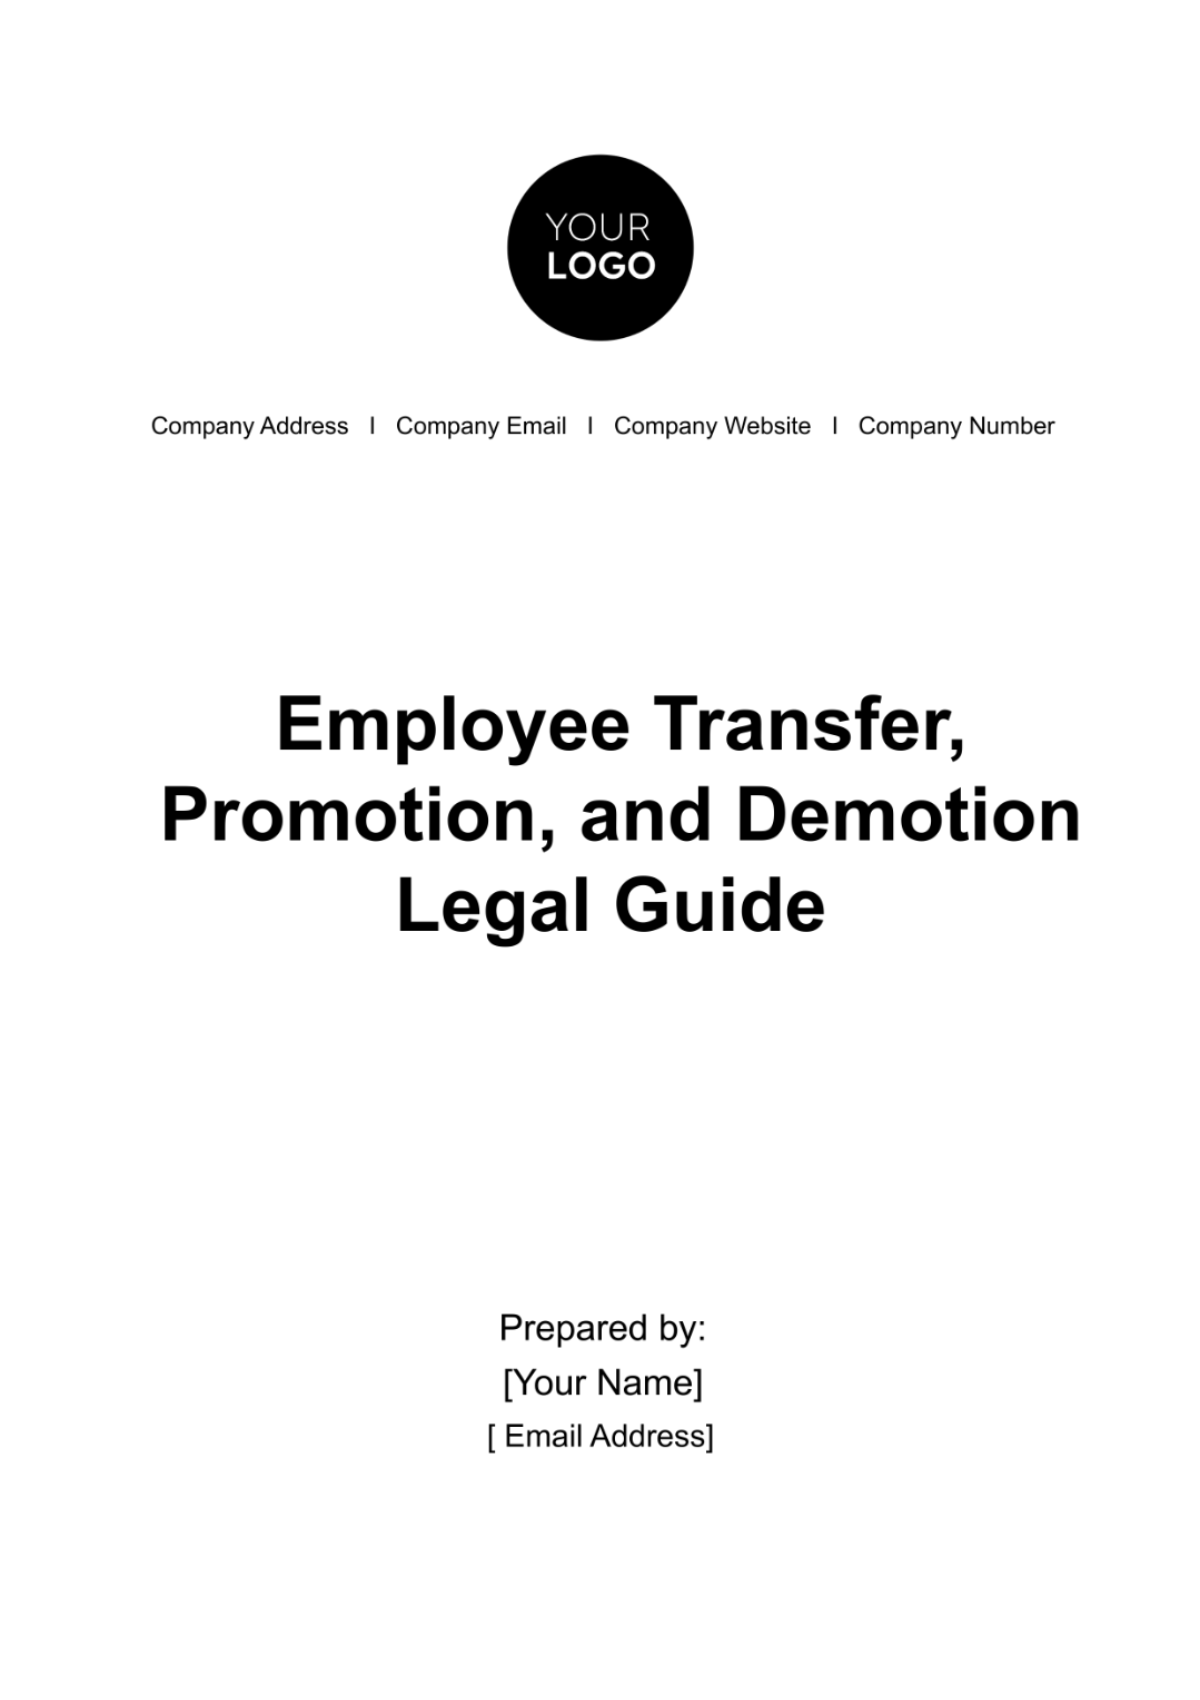 Employee Transfer, Promotion, and Demotion Legal Guide HR Template